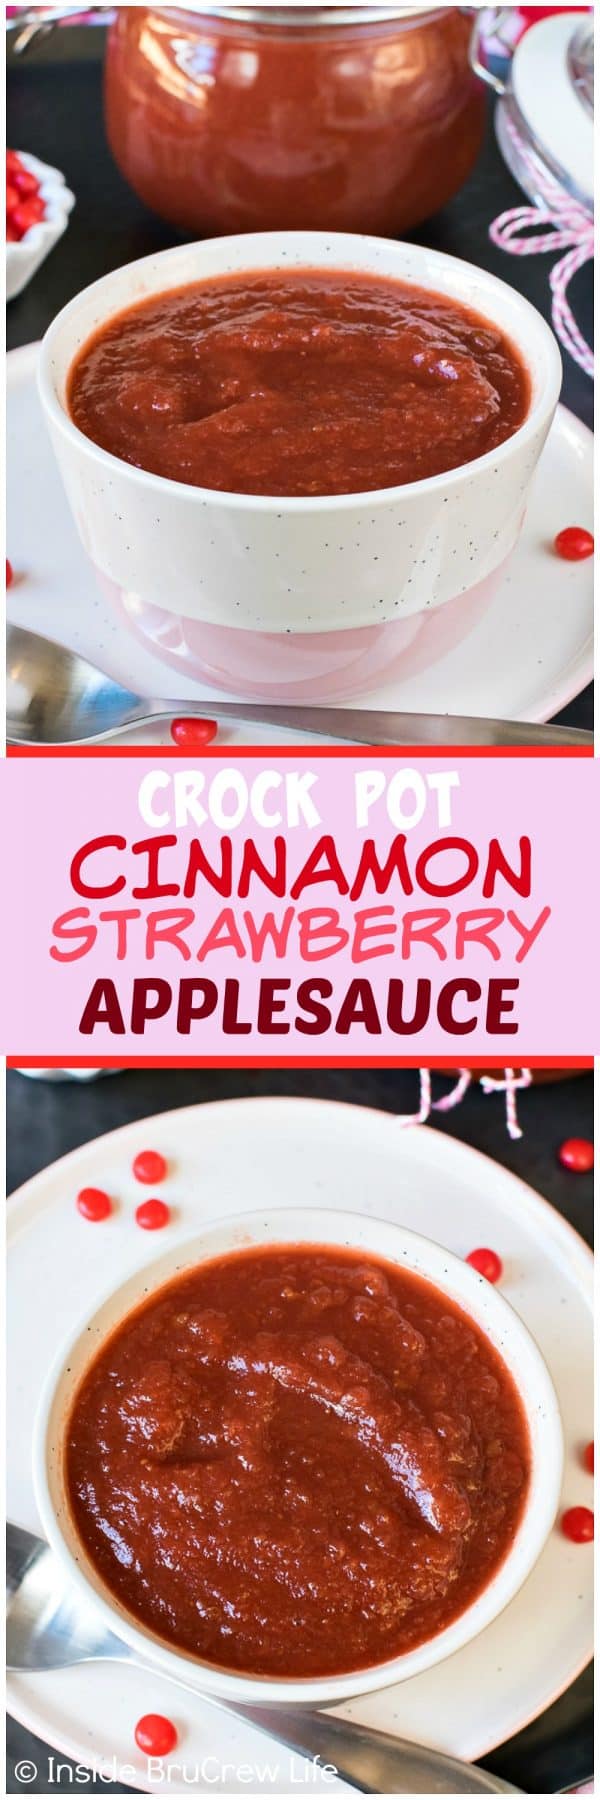 Crock Pot Cinnamon Strawberry Applesauce - this homemade applesauce is made with apples, strawberries, and cinnamon candies. Easy recipe to make when you have extra apples! #apple #cinnamon #redhots #crockpot #recipe #applesauce #strawberry #homemade #easy